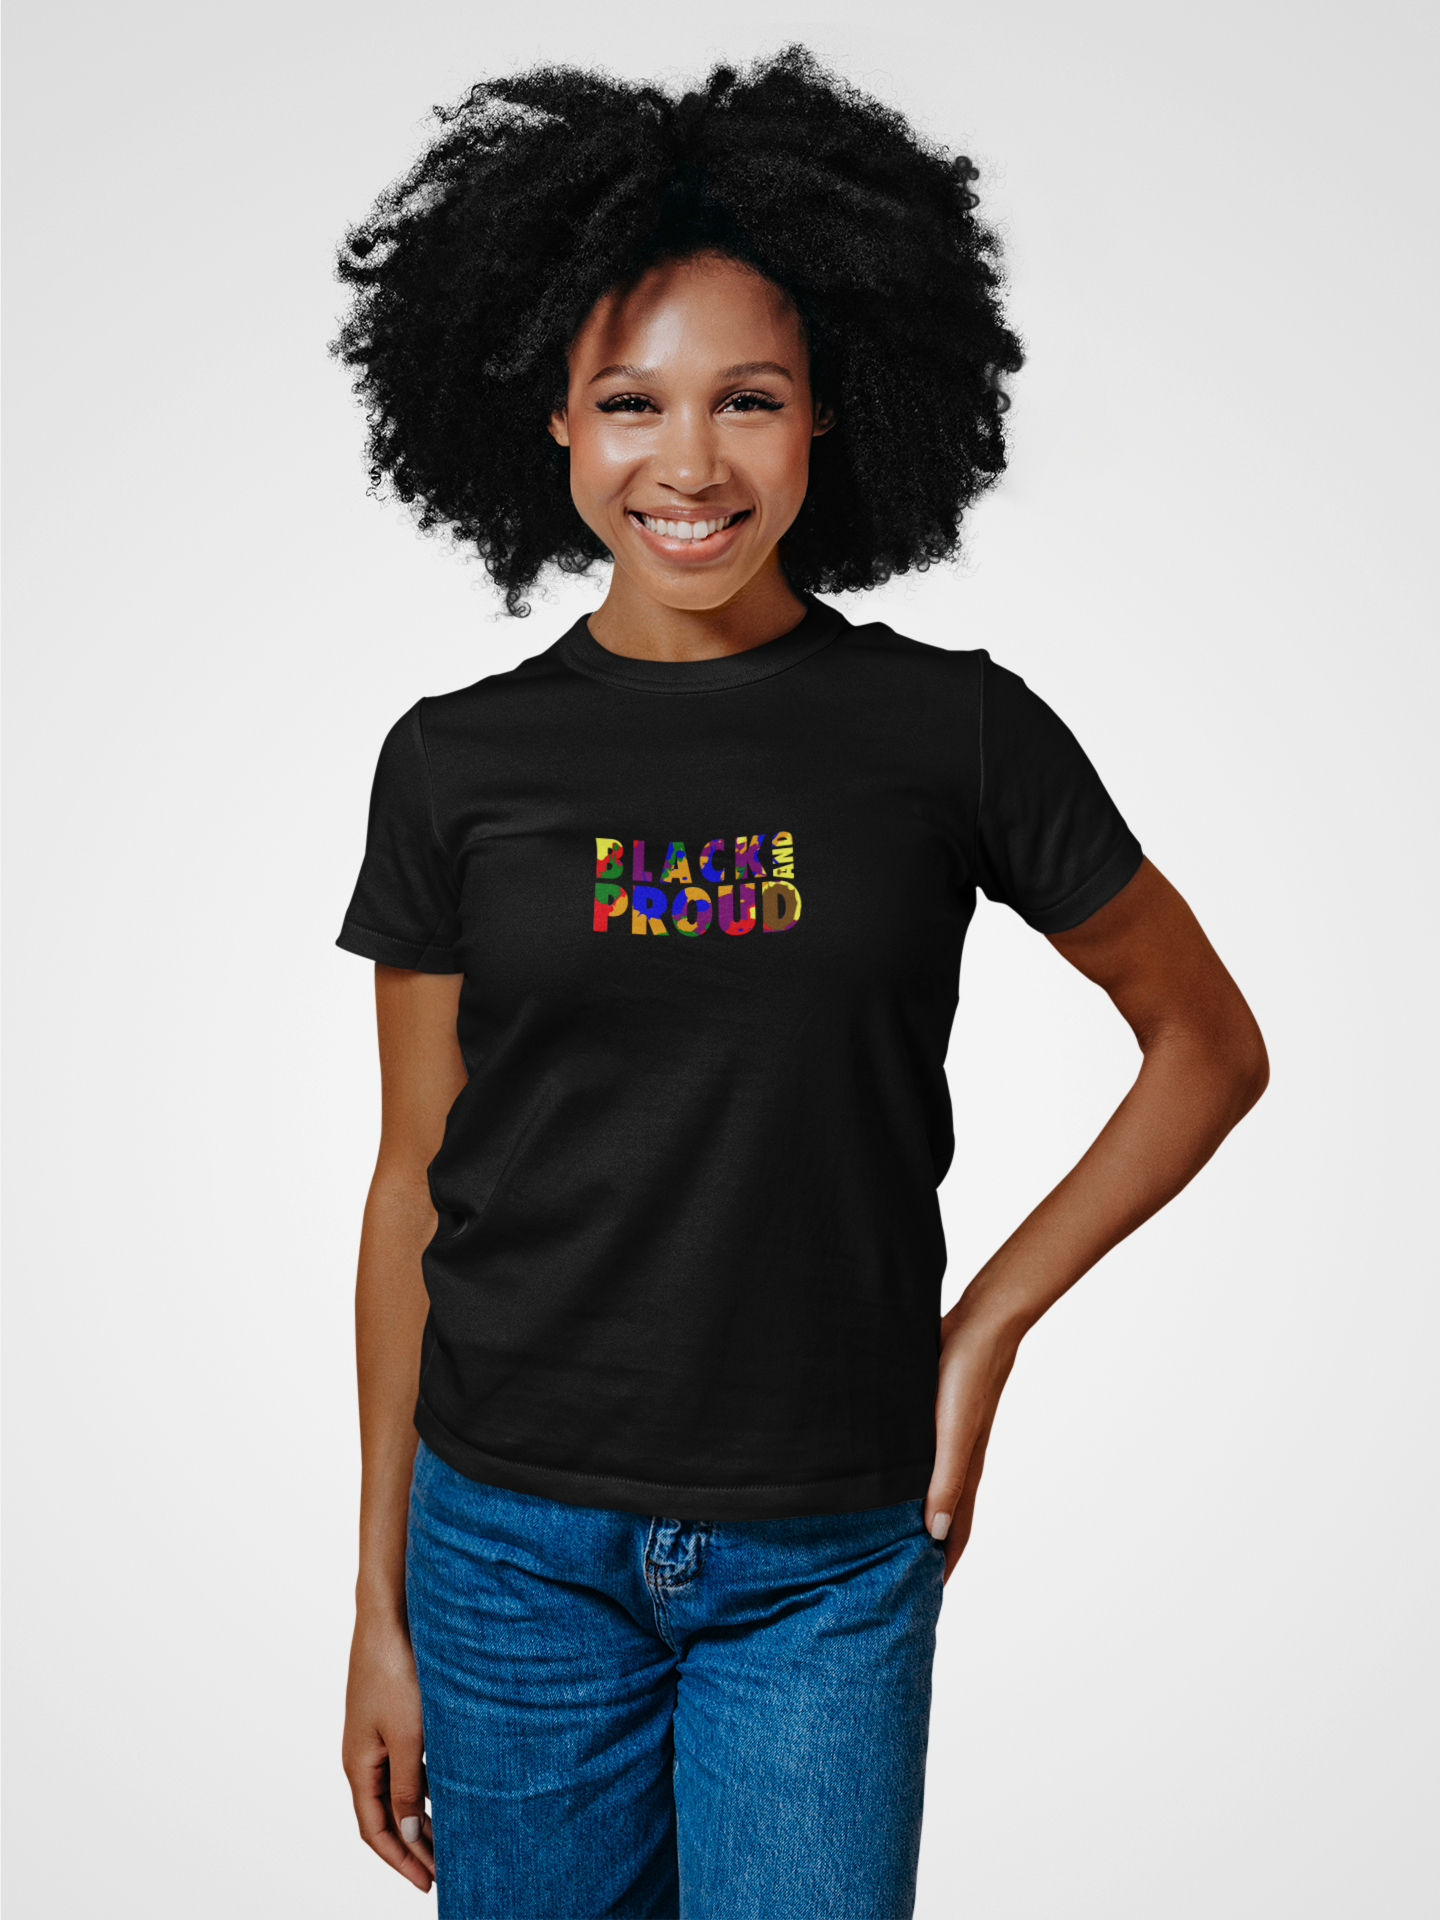 Black and Proud T-shirt